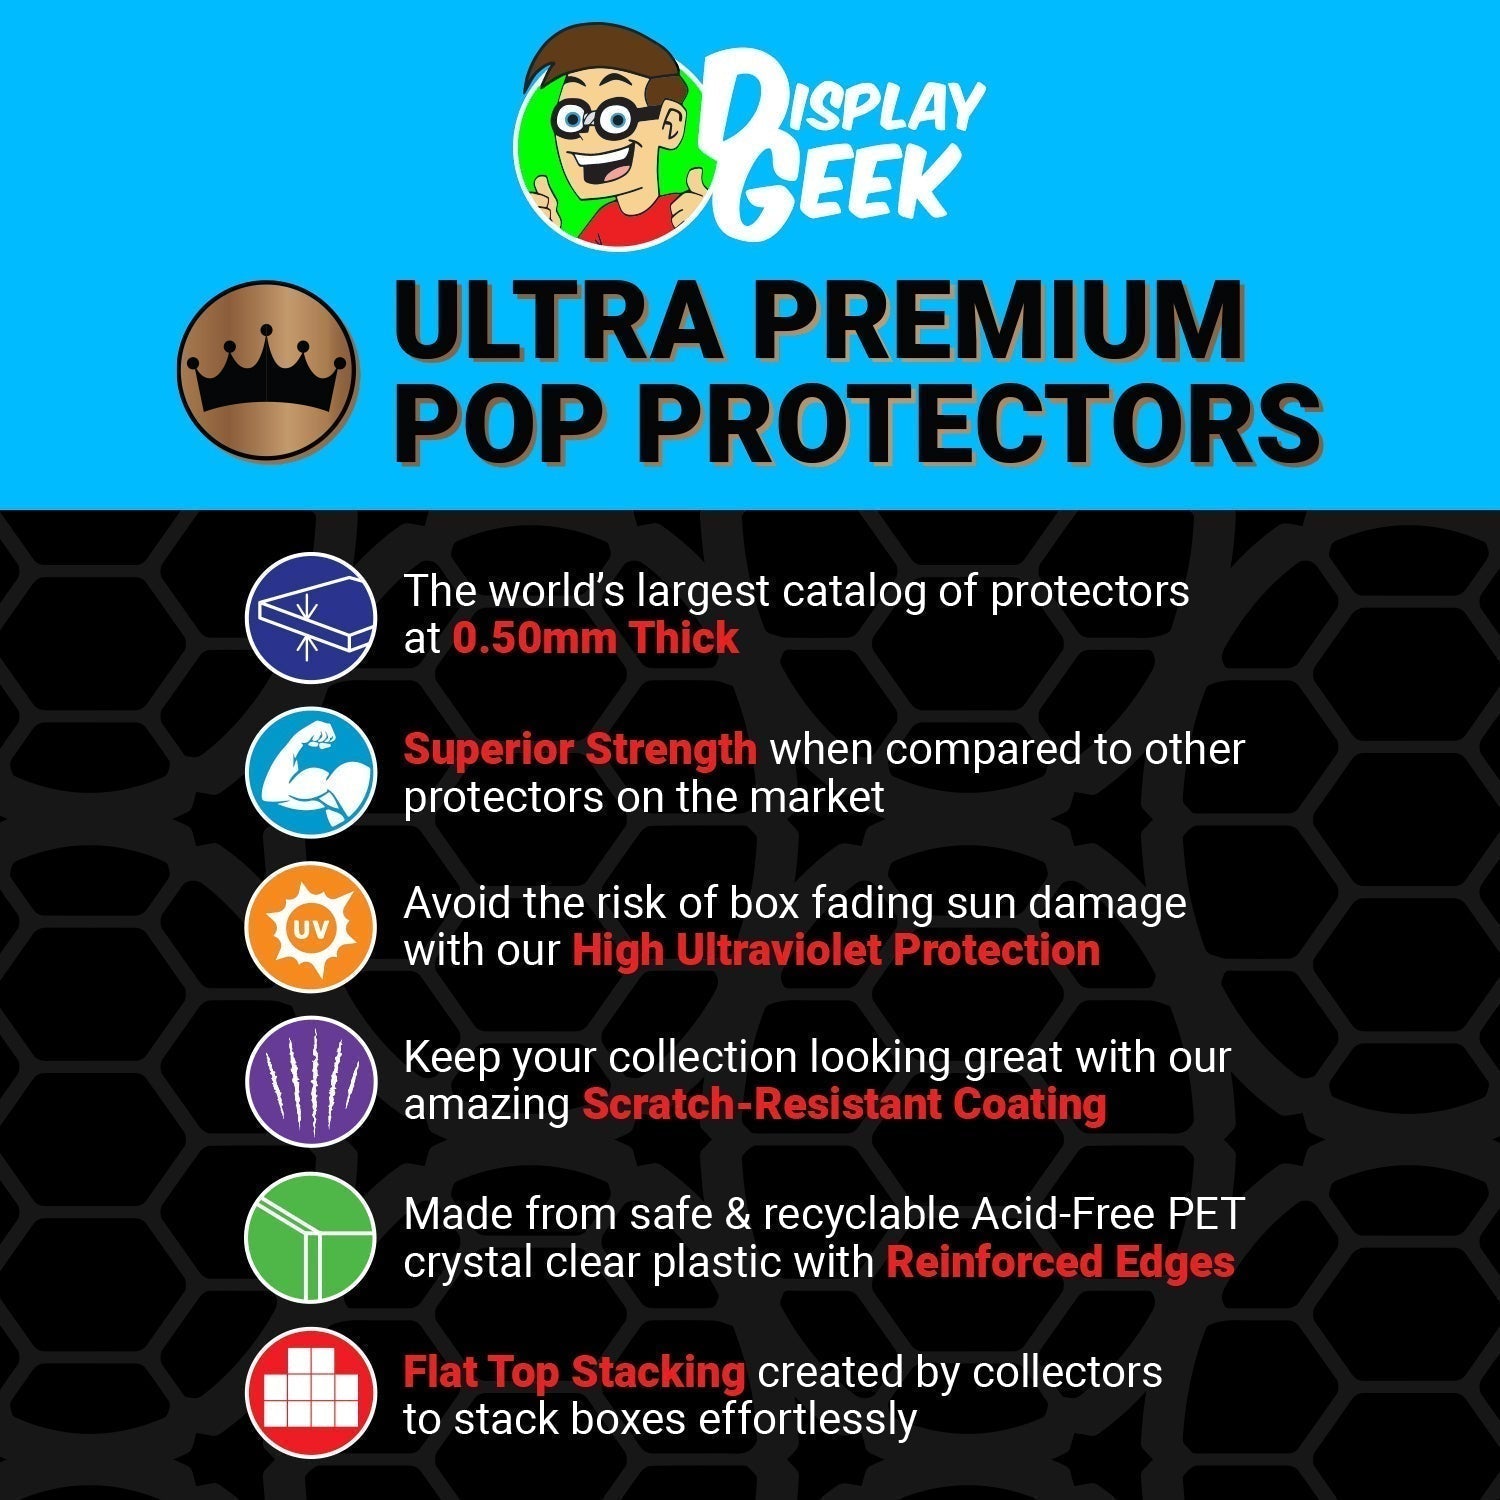 Pop Protector for Bounty Hunters Collection Darth Vader #442 Funko Pop Deluxe - PPG Pop Protector Guide Search Created by Display Geek